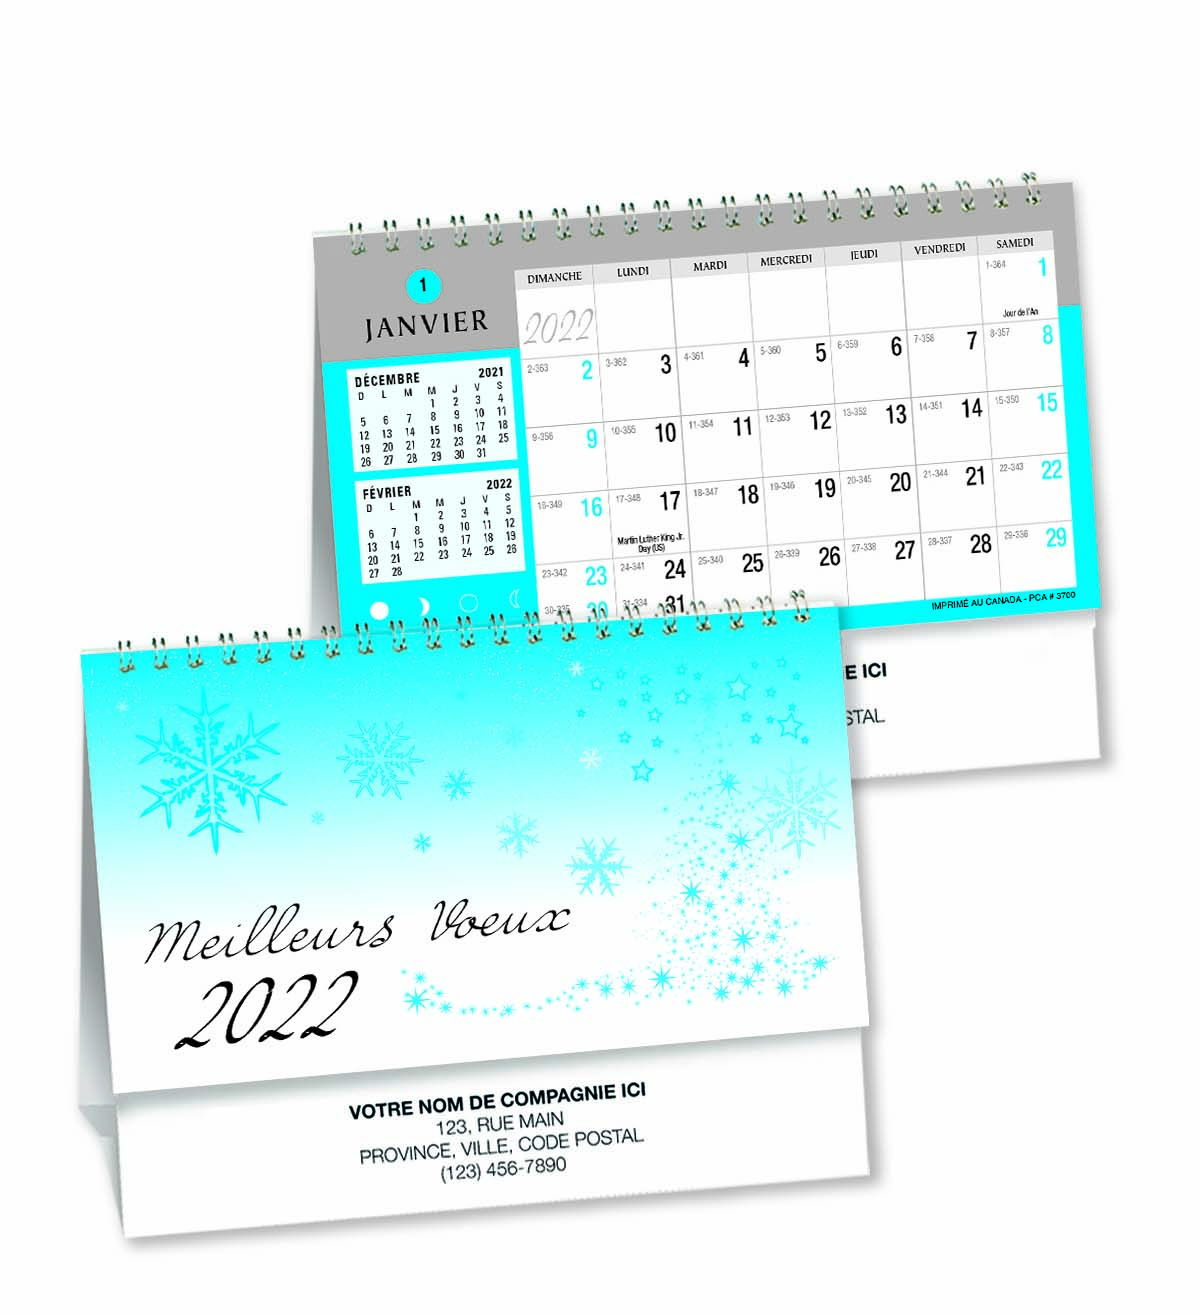 This 2022 desk calendar is customized with your business information on both sides.